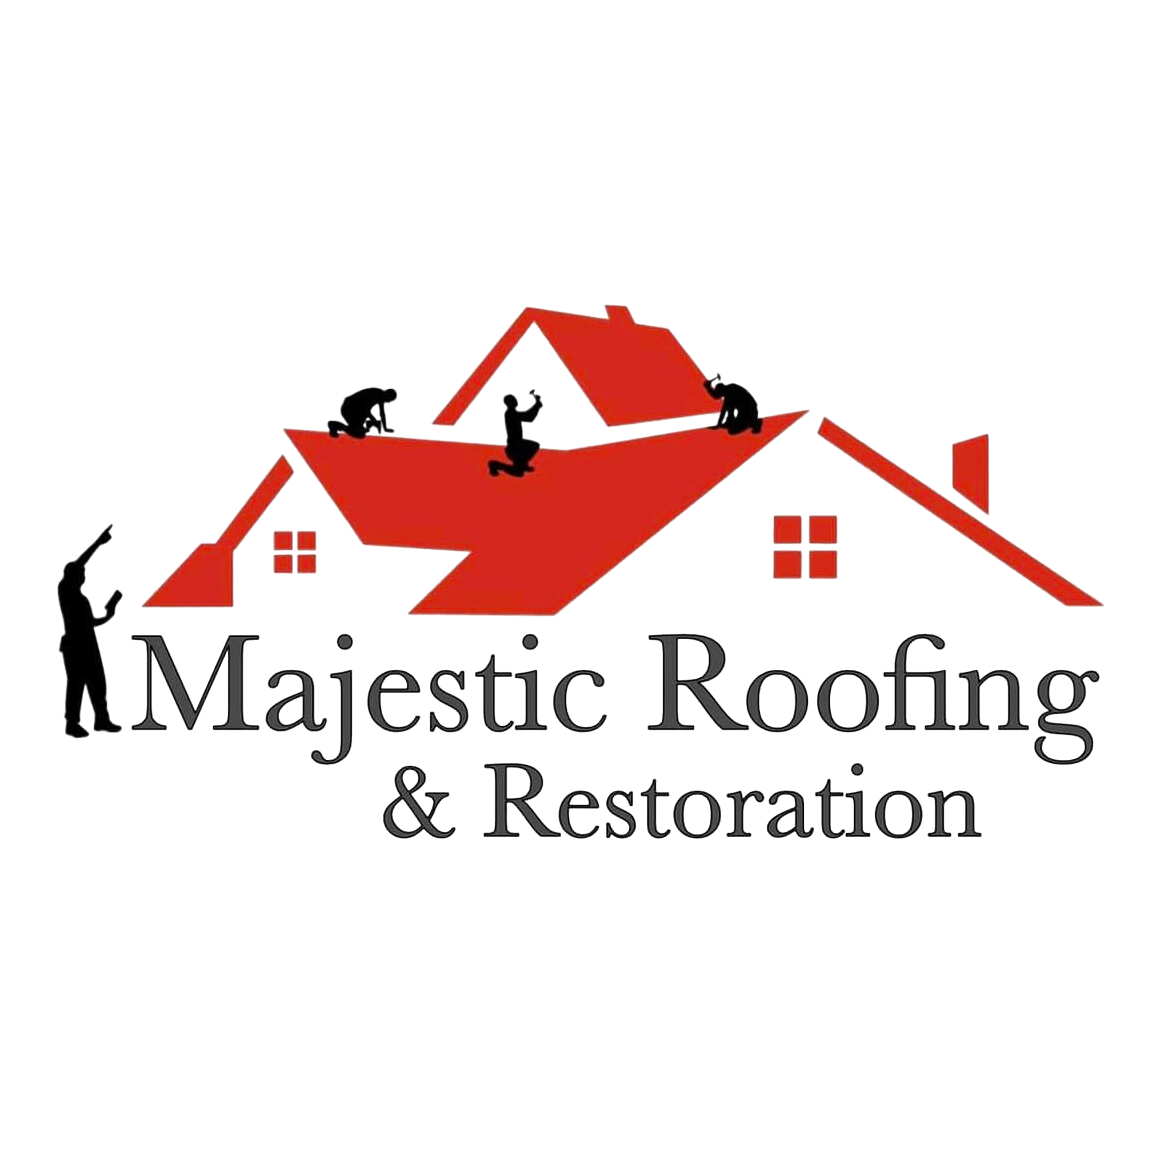 Majestic Roofing and Restoration - Little Rock, AR 72223 - (501)448-2019 | ShowMeLocal.com